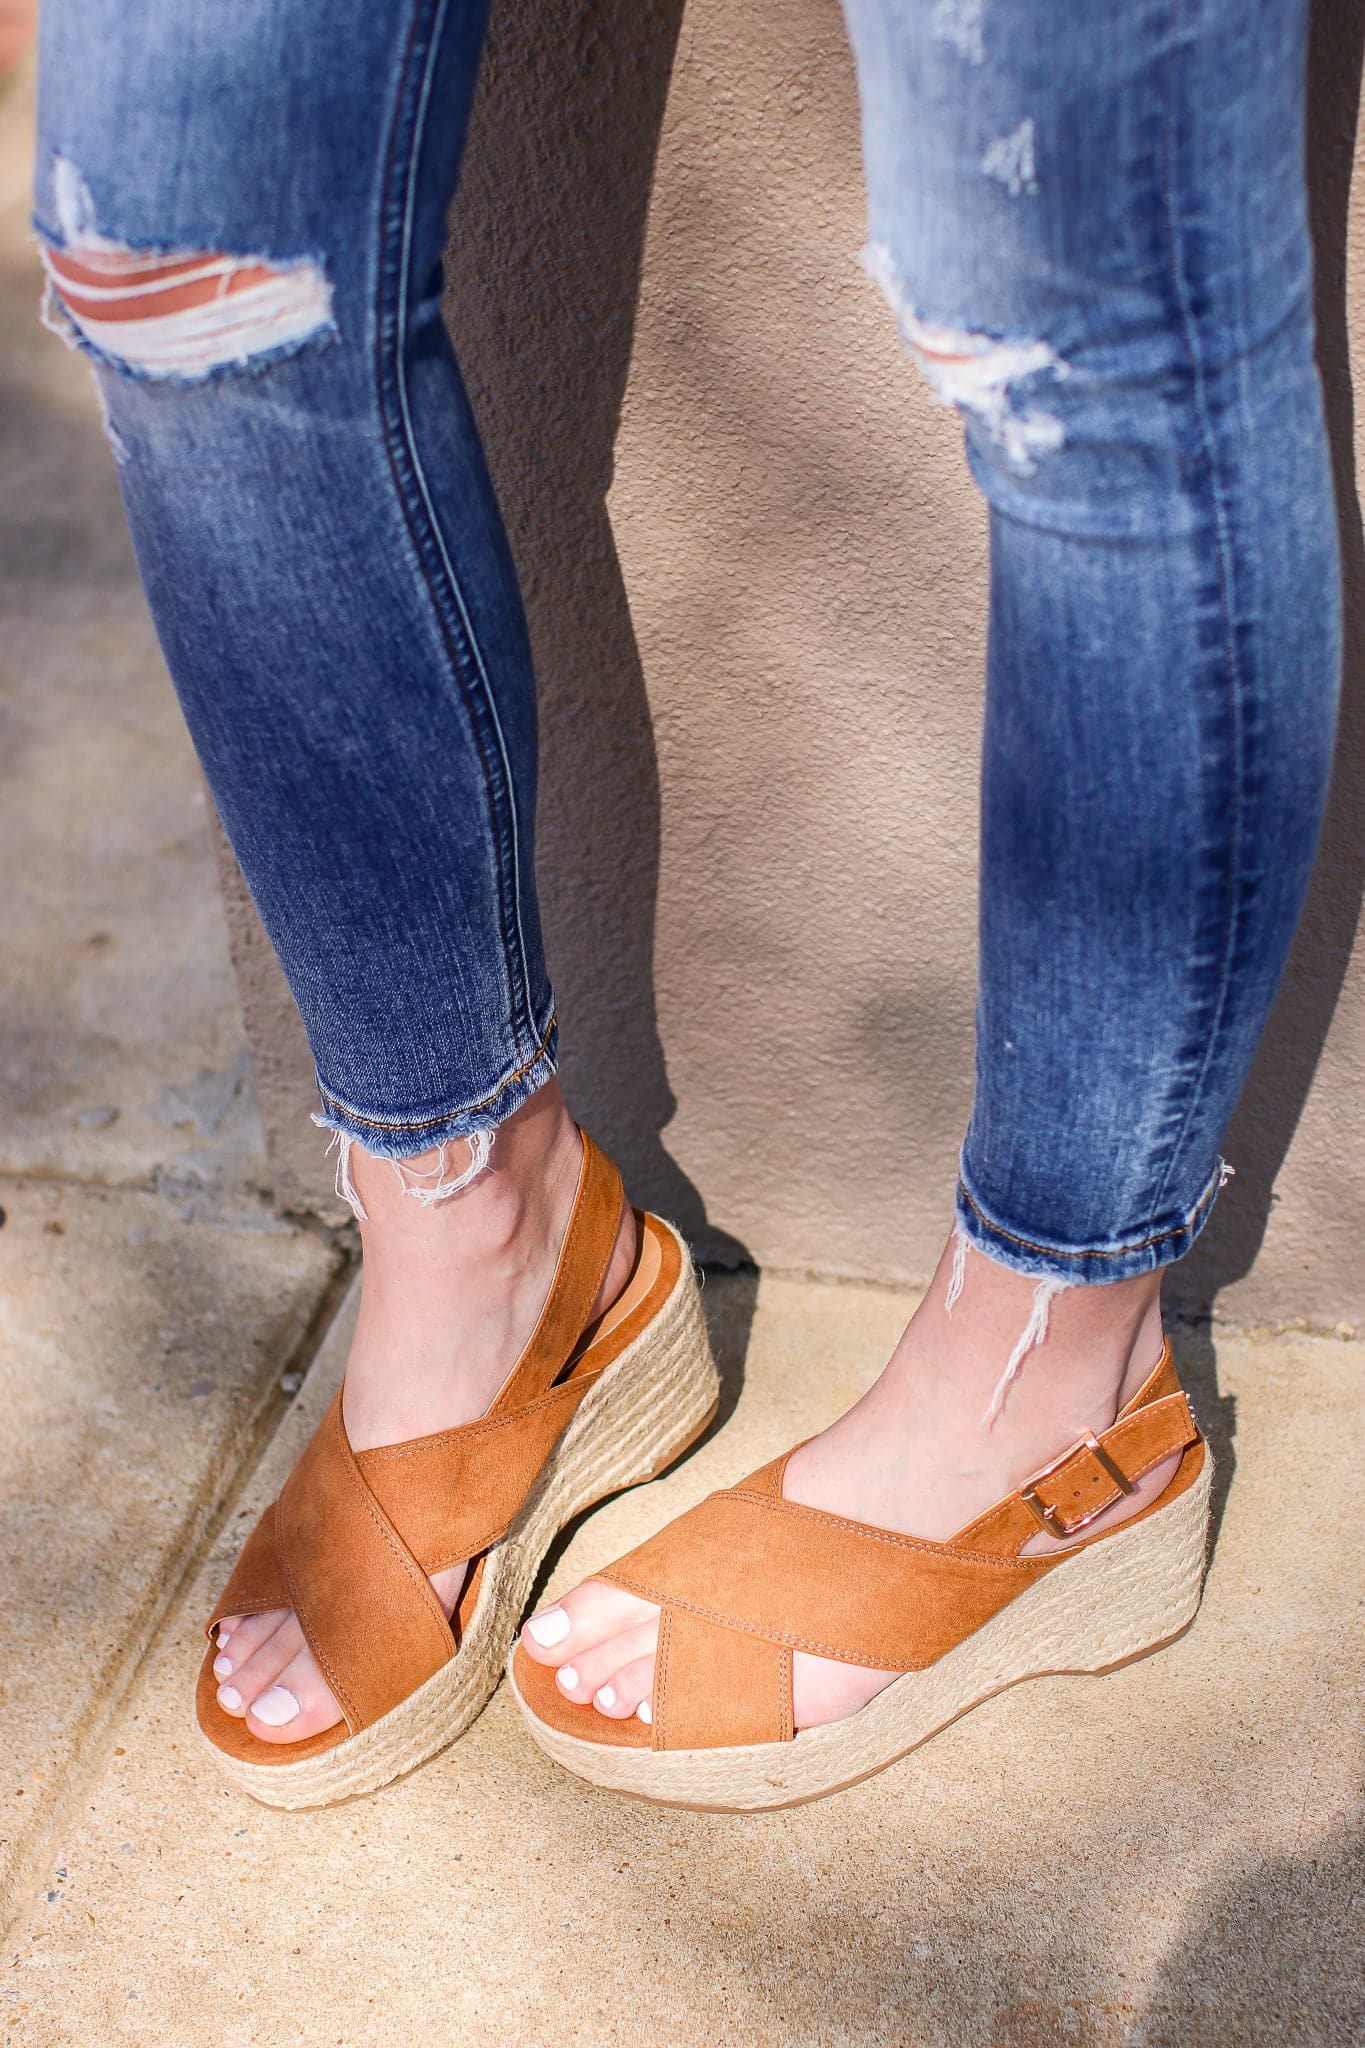  Gone for the Weekend Cross Strap Espadrille Wedges - FINAL SALE - Madison and Mallory